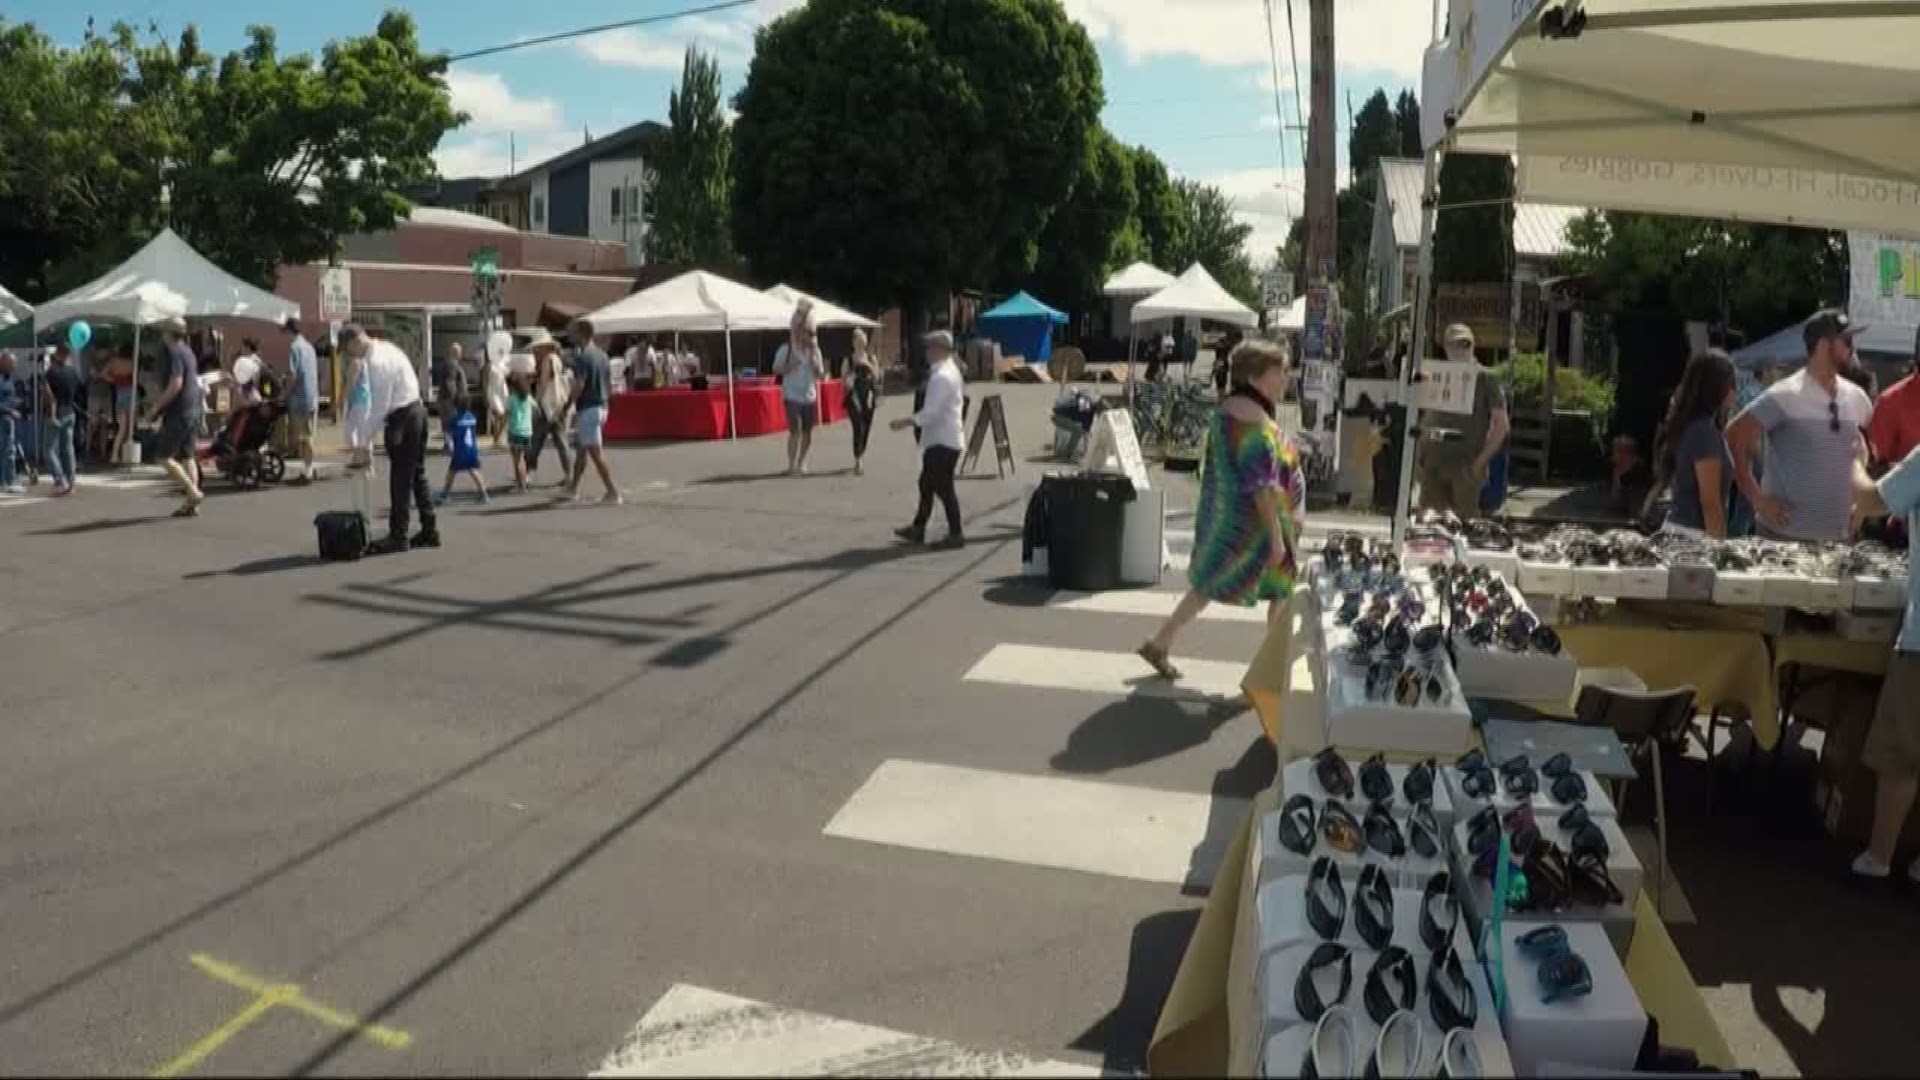 The festival raised money for a unique program that is helping foster better relationships between local youth in the Boise Neighborhood and many of the businesses there.